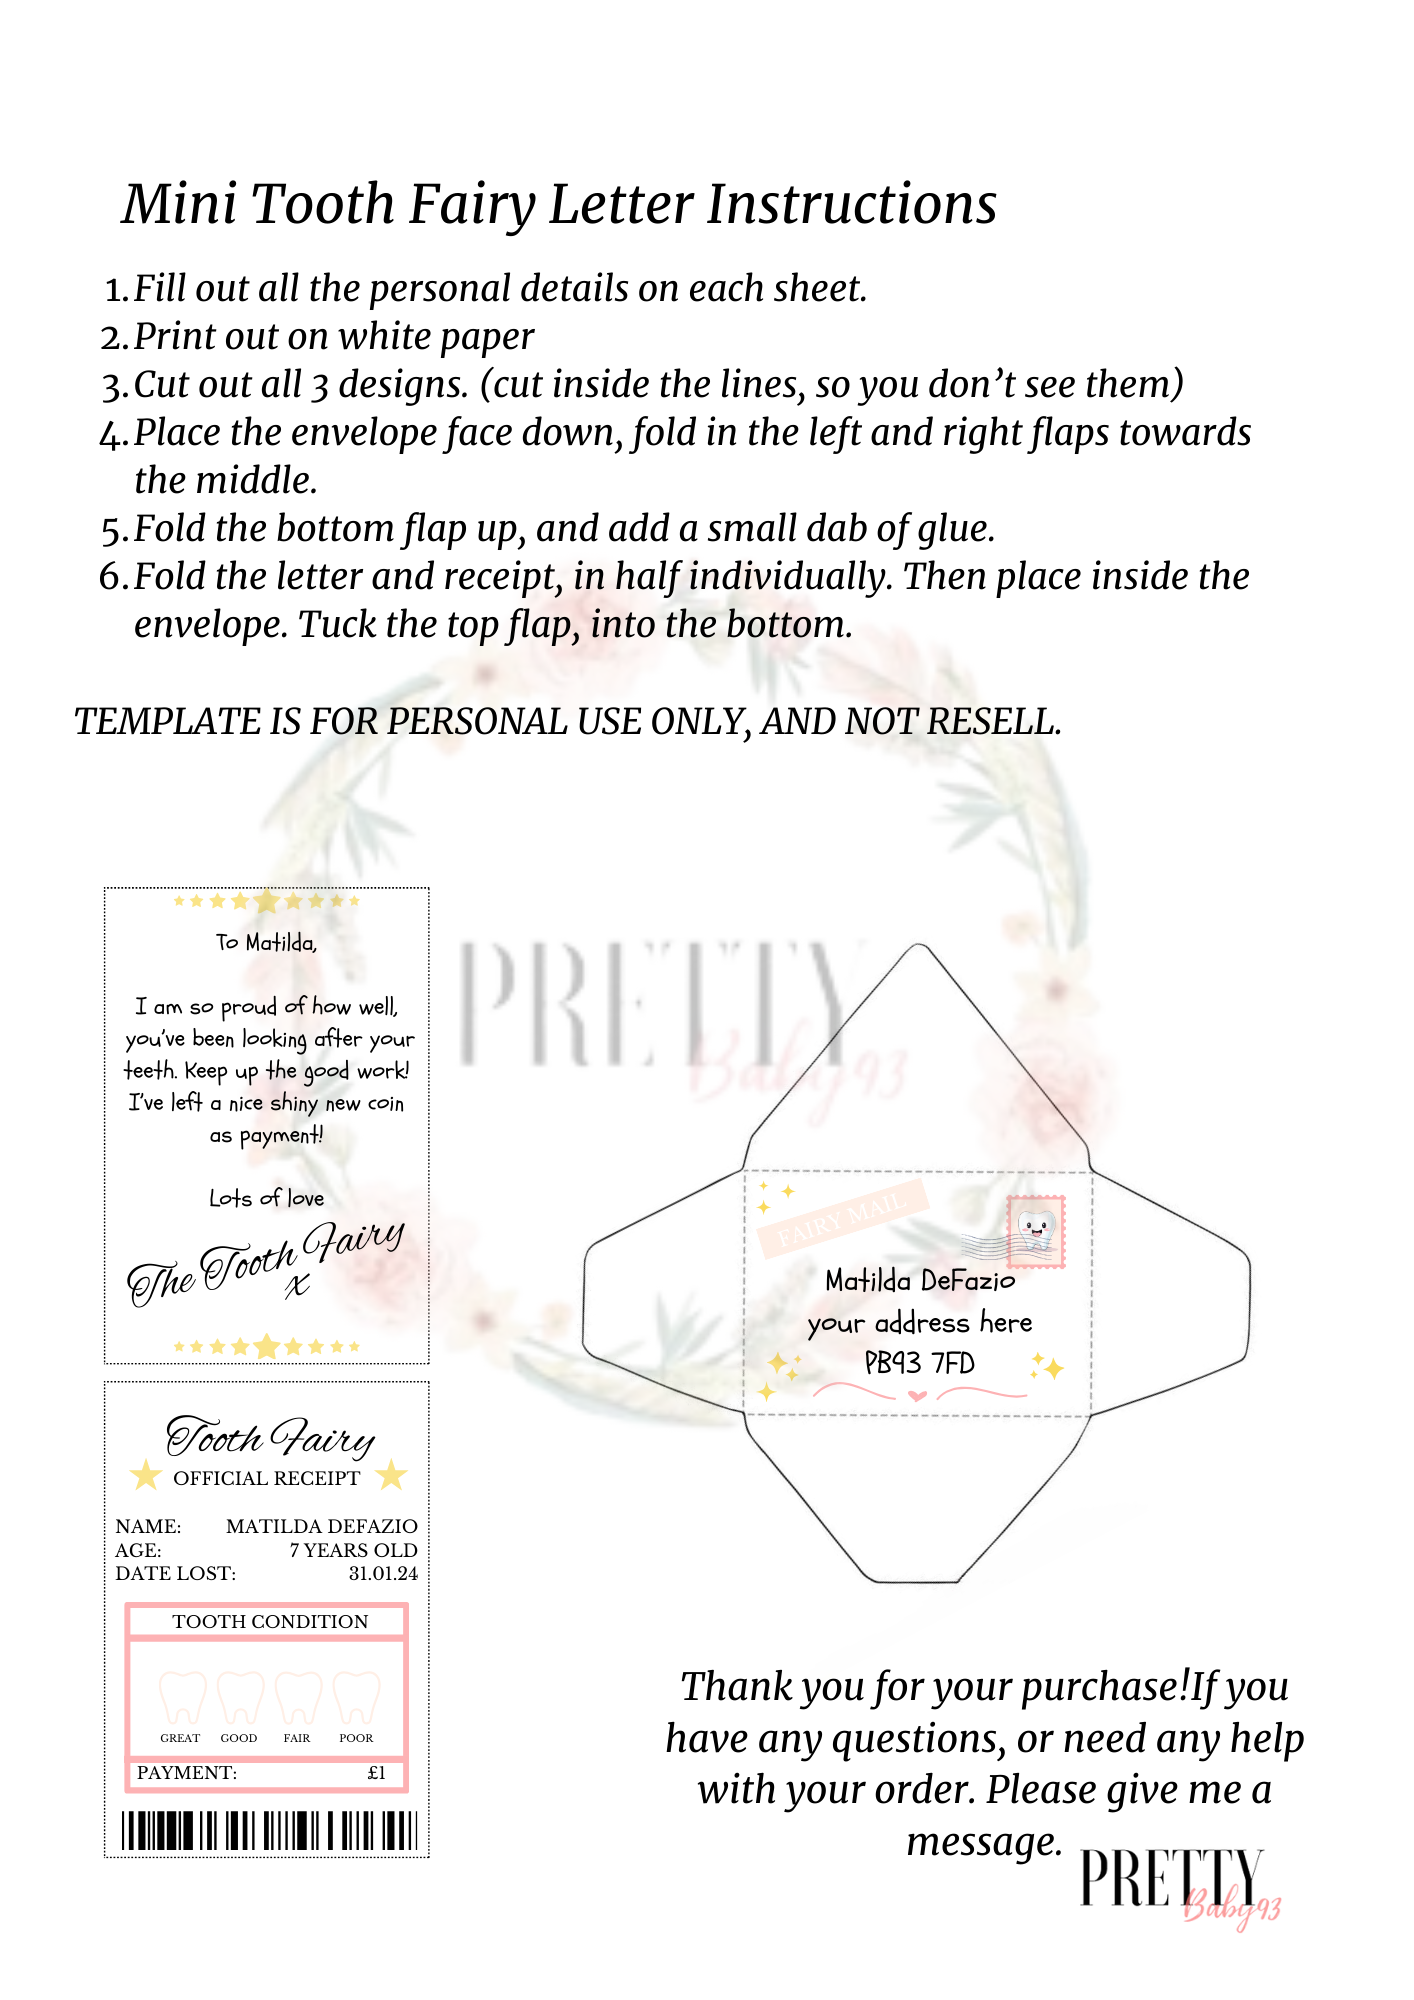 Mini Tooth Fairy Letter and Envelope  (Download and Print)